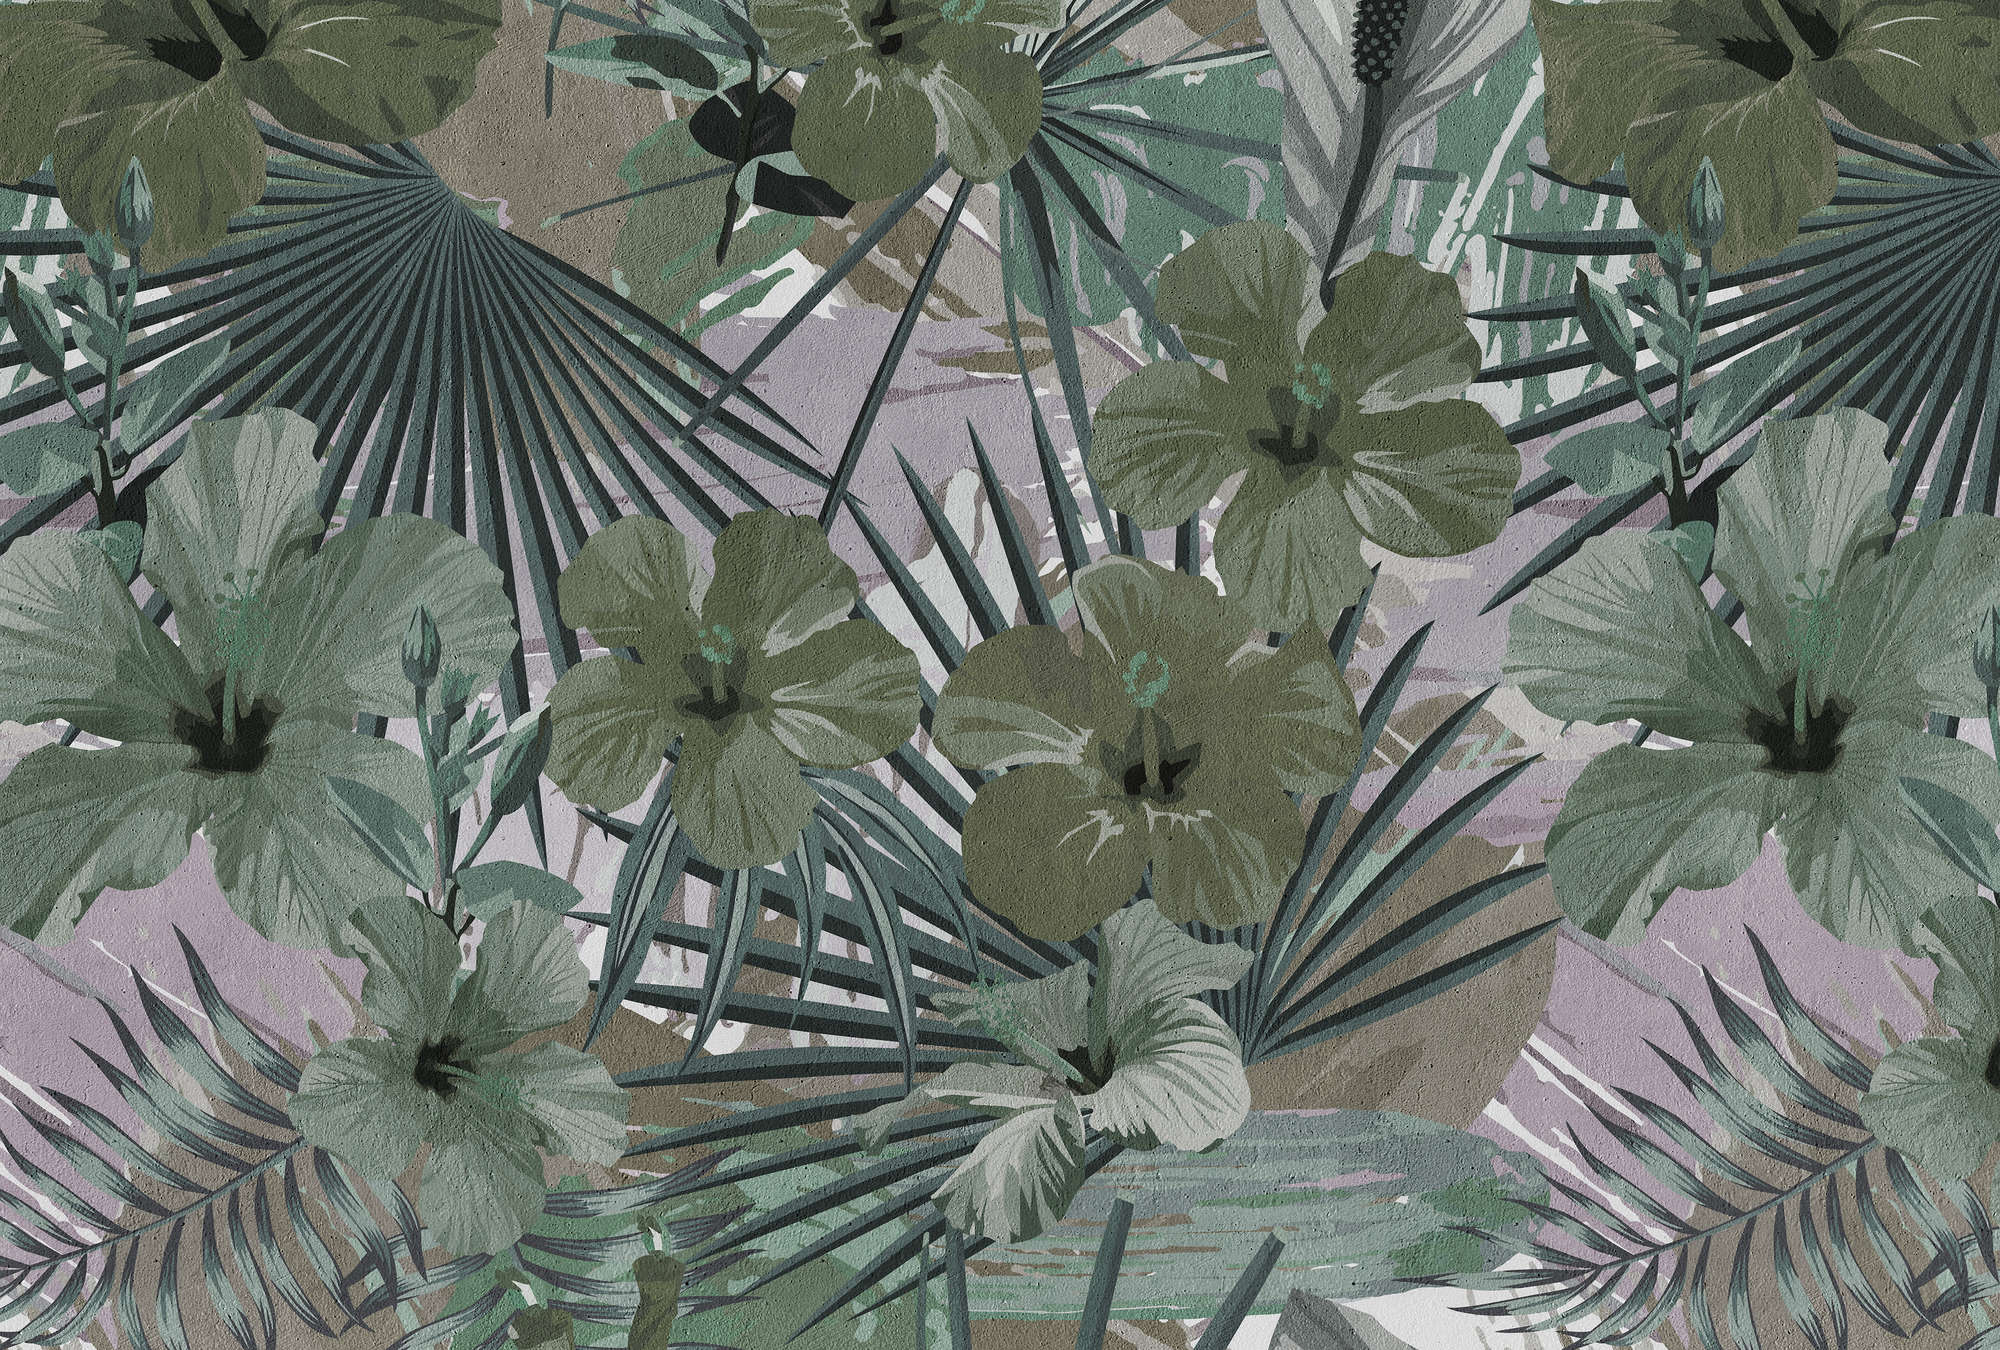             Photo wallpaper jungle palm trees and flower - green, grey
        